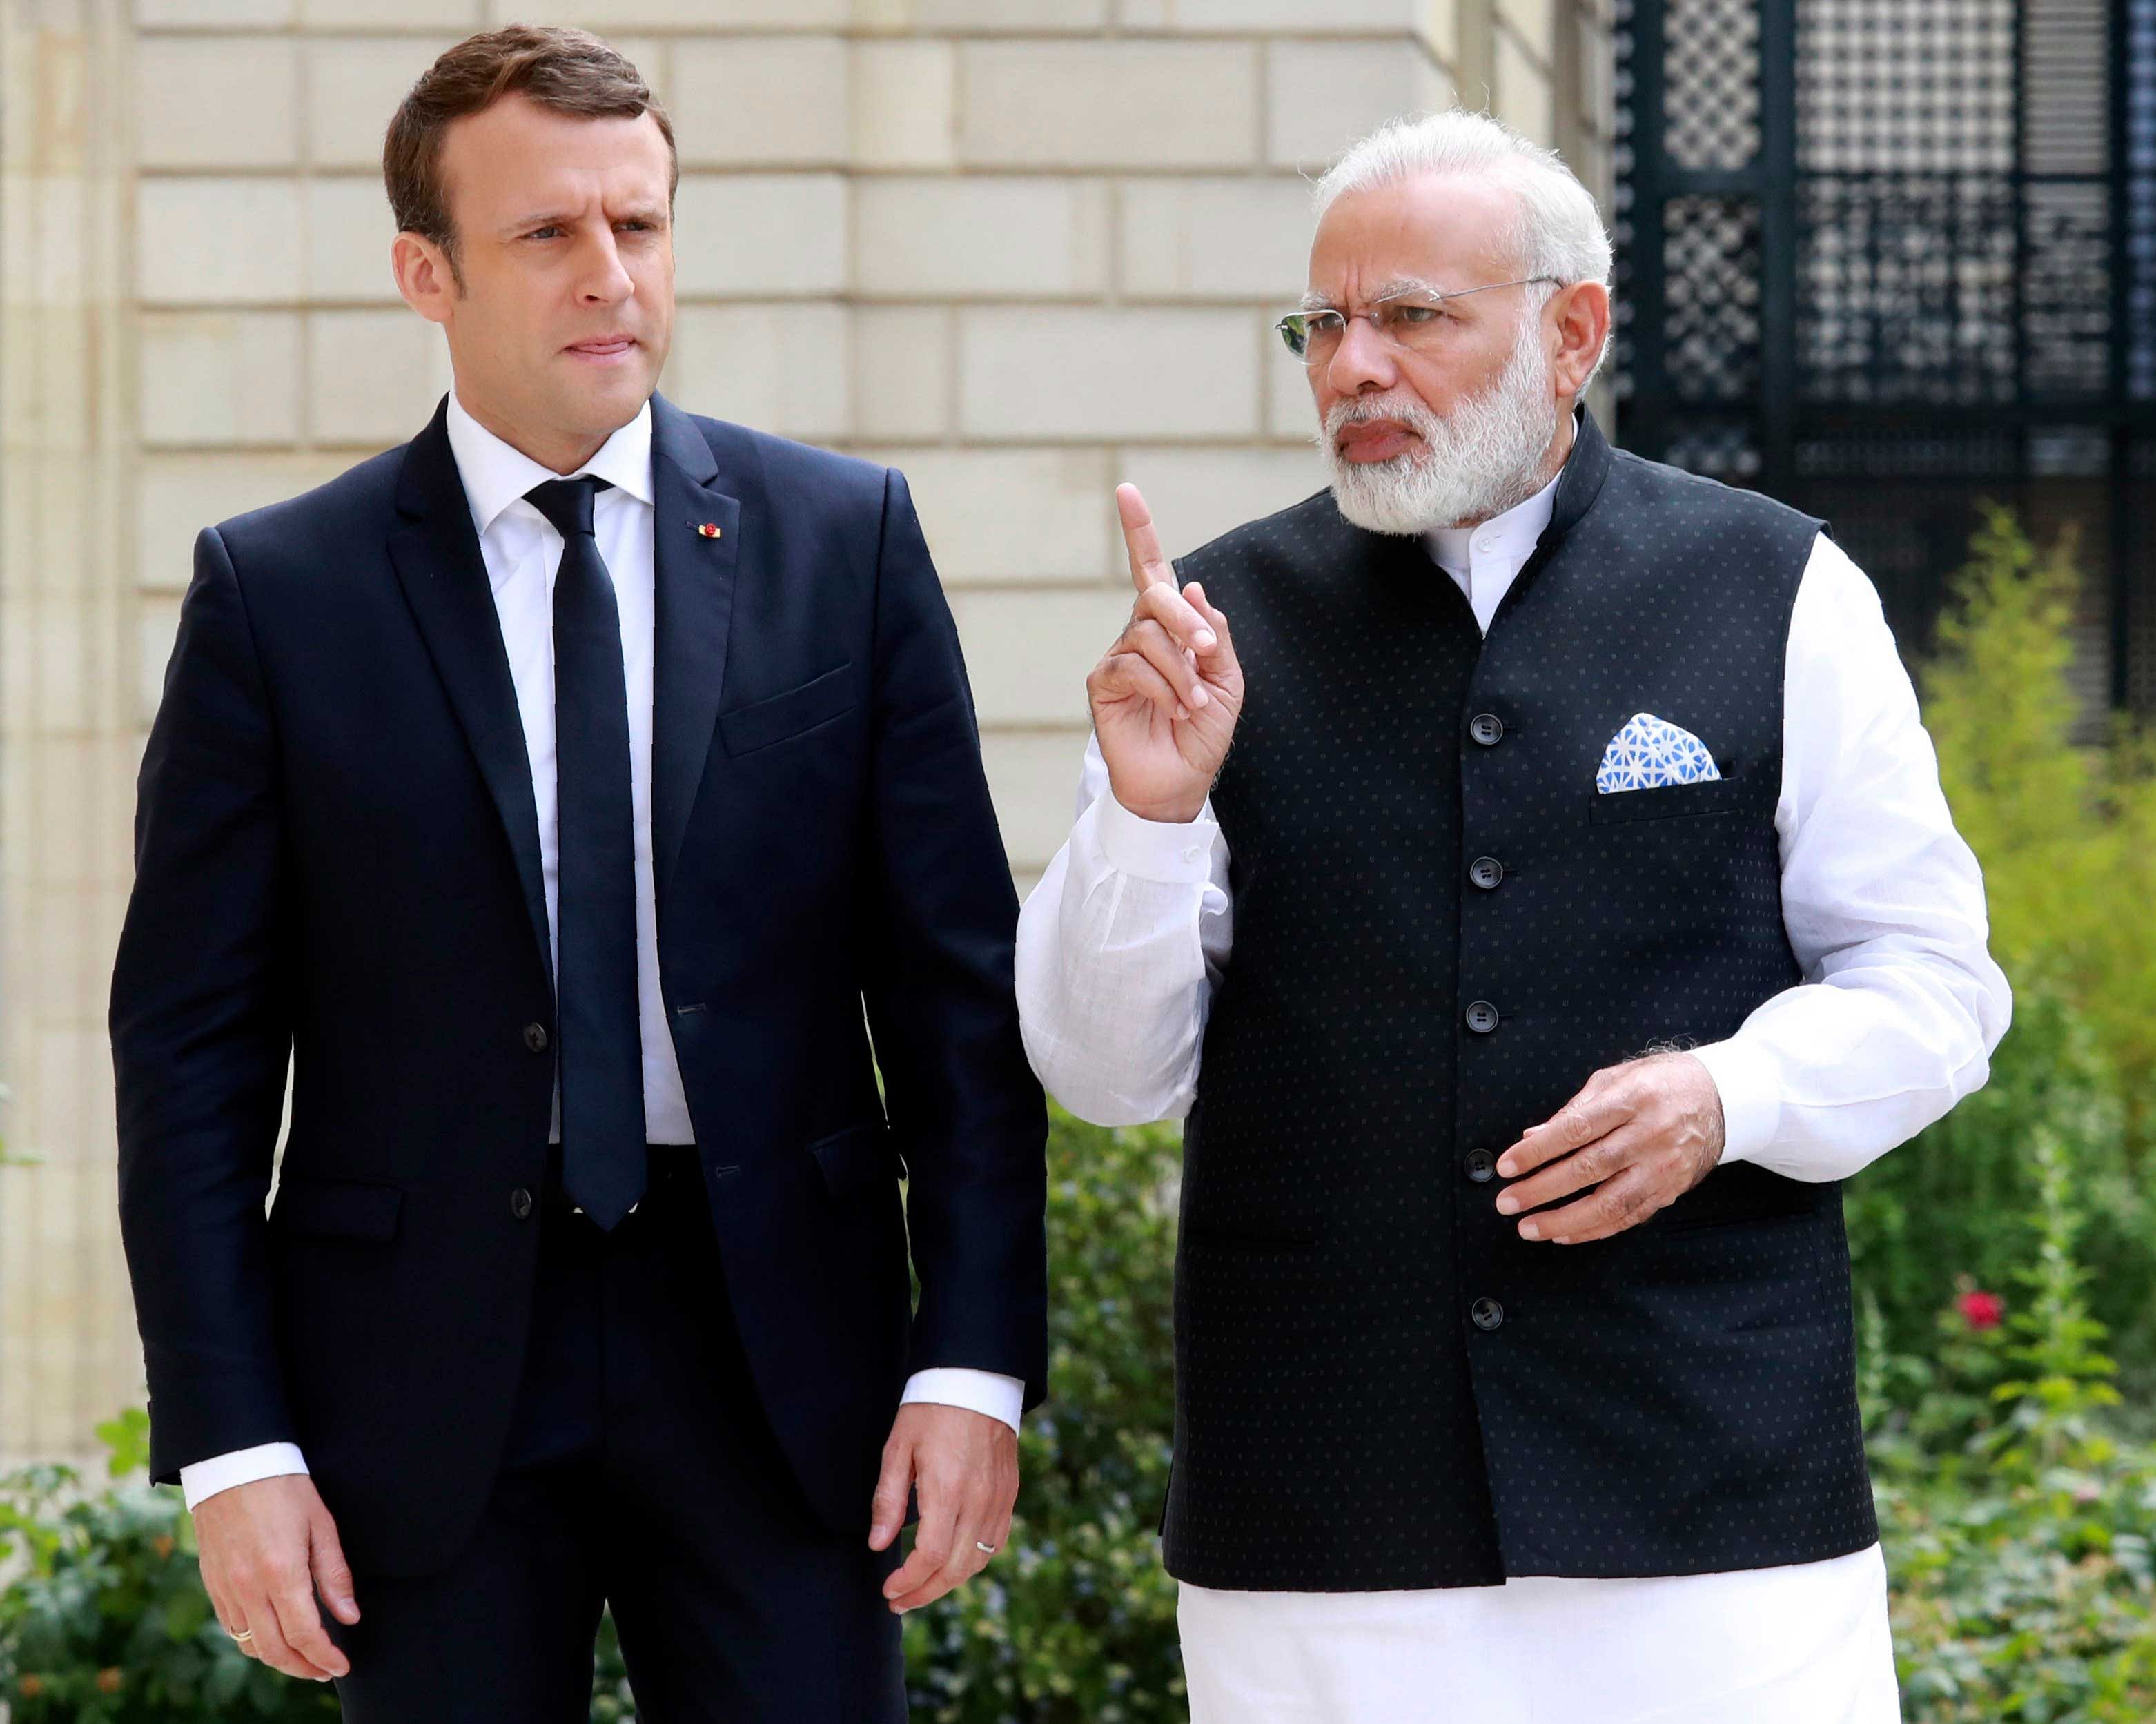 ndian Prime Minister Narendra Modi (R) speaks with French President Emmanuel Macron in the garden of the Elysee Palace following their meeting in Paris, France, June 3, 2017. Reuters image